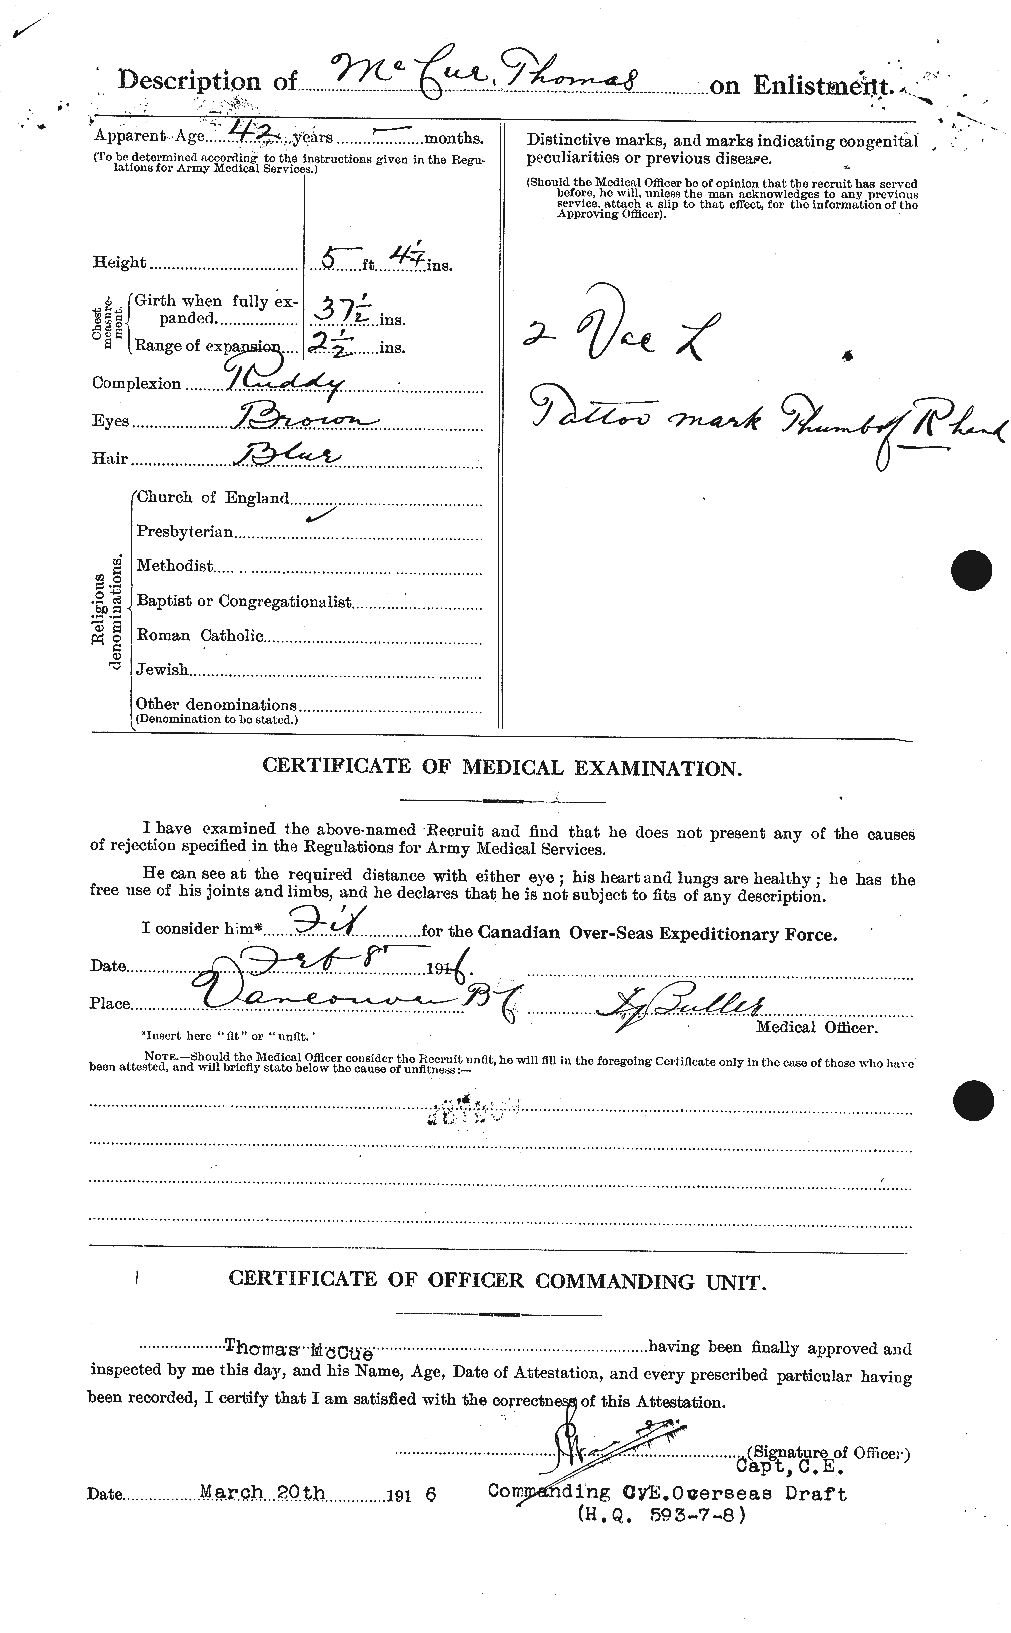 Personnel Records of the First World War - CEF 135450b